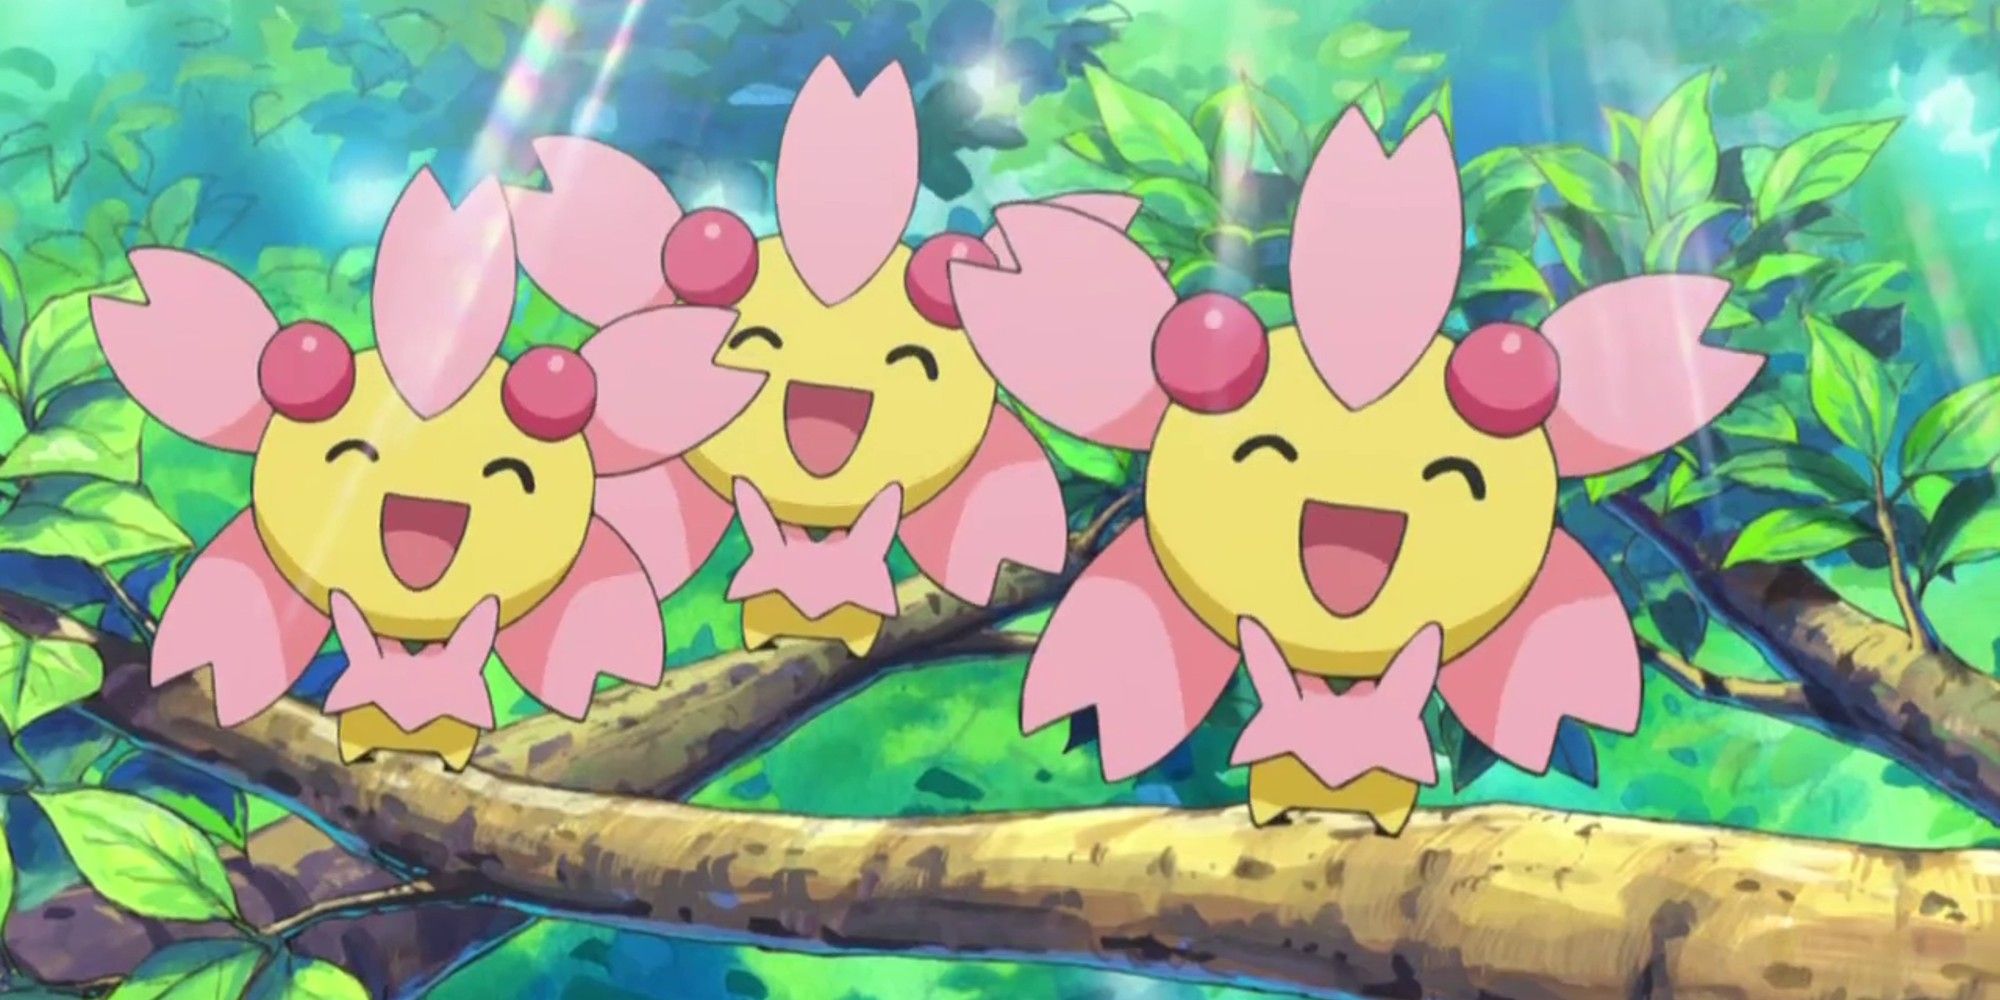 Cherrim trio from the anime, all looking happy and standing on a branch